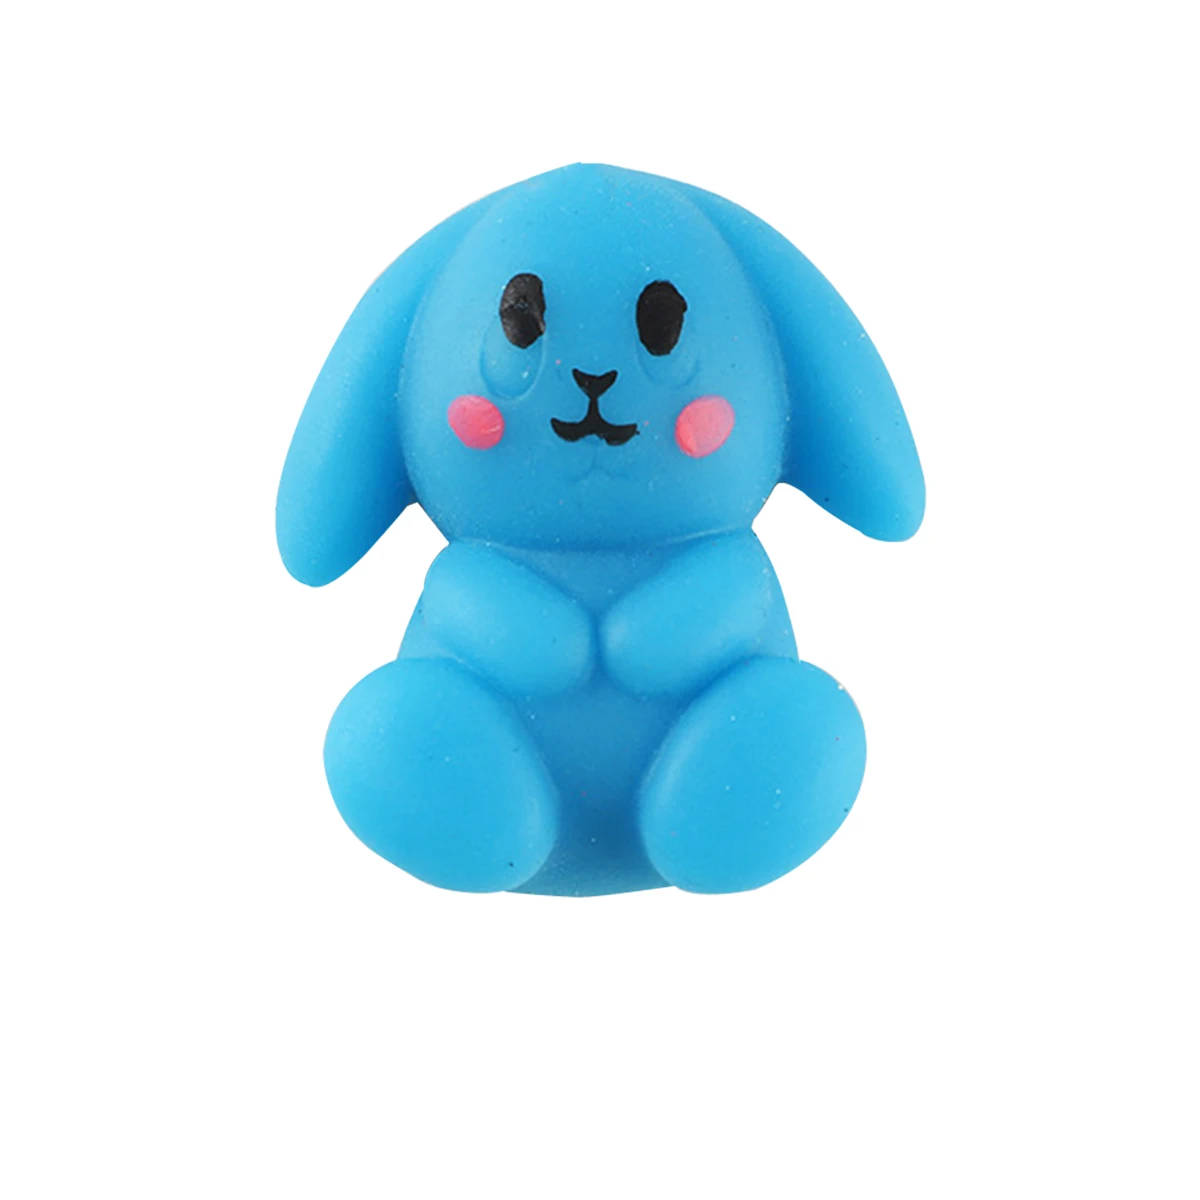 Kawaii Squishies Cute Mochi Squishy Animals Mini Stress Relief Squeeze Toys for Kids Party Favors Christmas Easter Birthday Gift mochis squishy toys Squeeze Toys